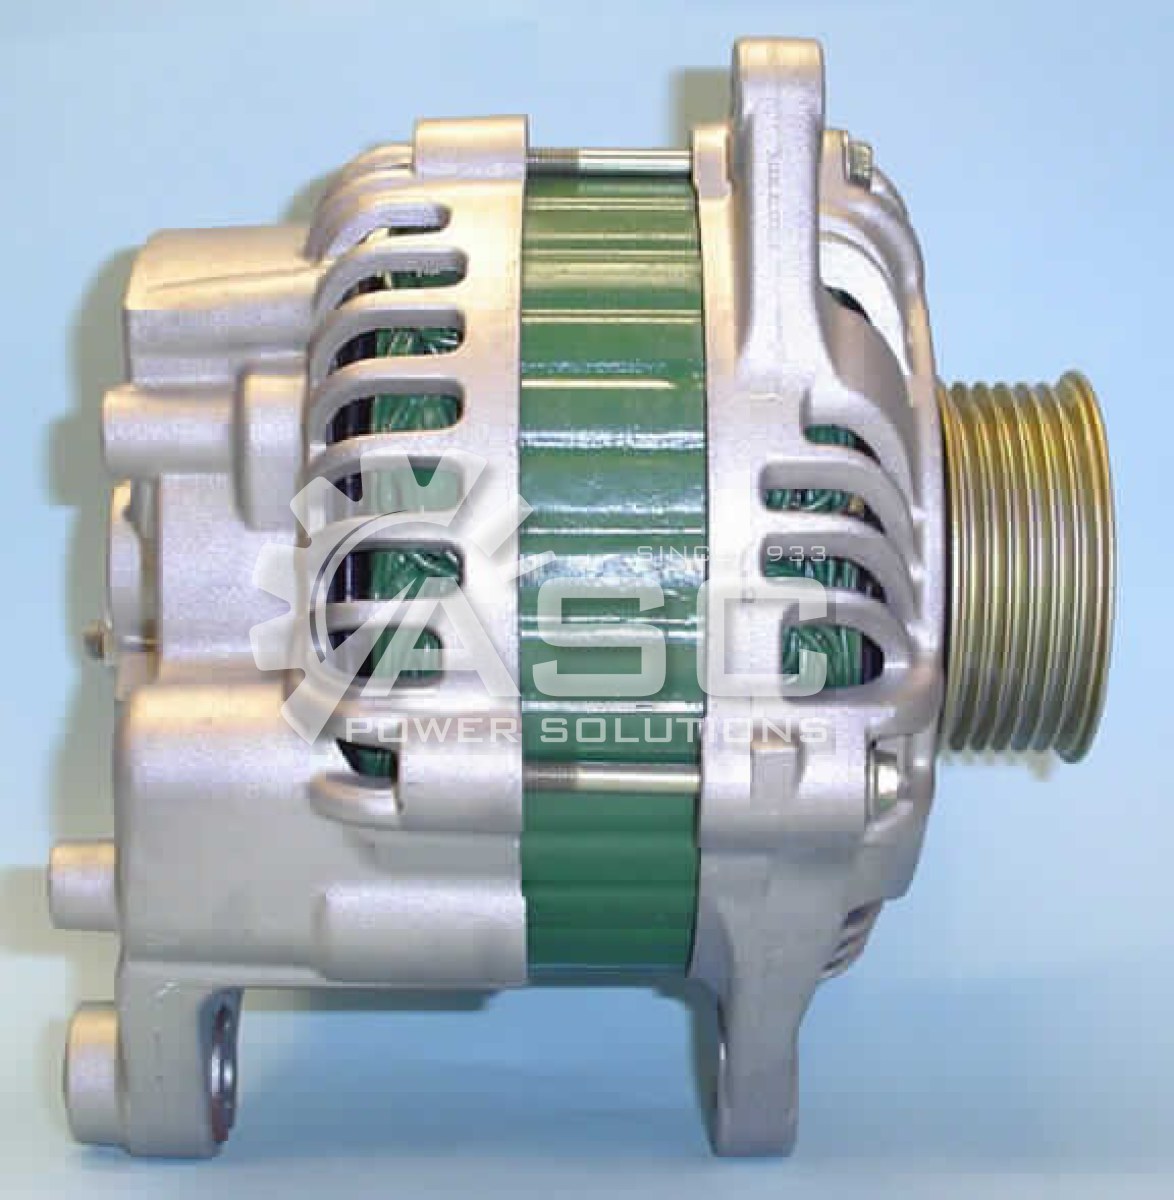 A481422N_NEW ASC POWER SOLUTIONS AFTERMARKET MITSUBISHI ALTERNATOR 12V 110A FOR INFINITI & NISSAN